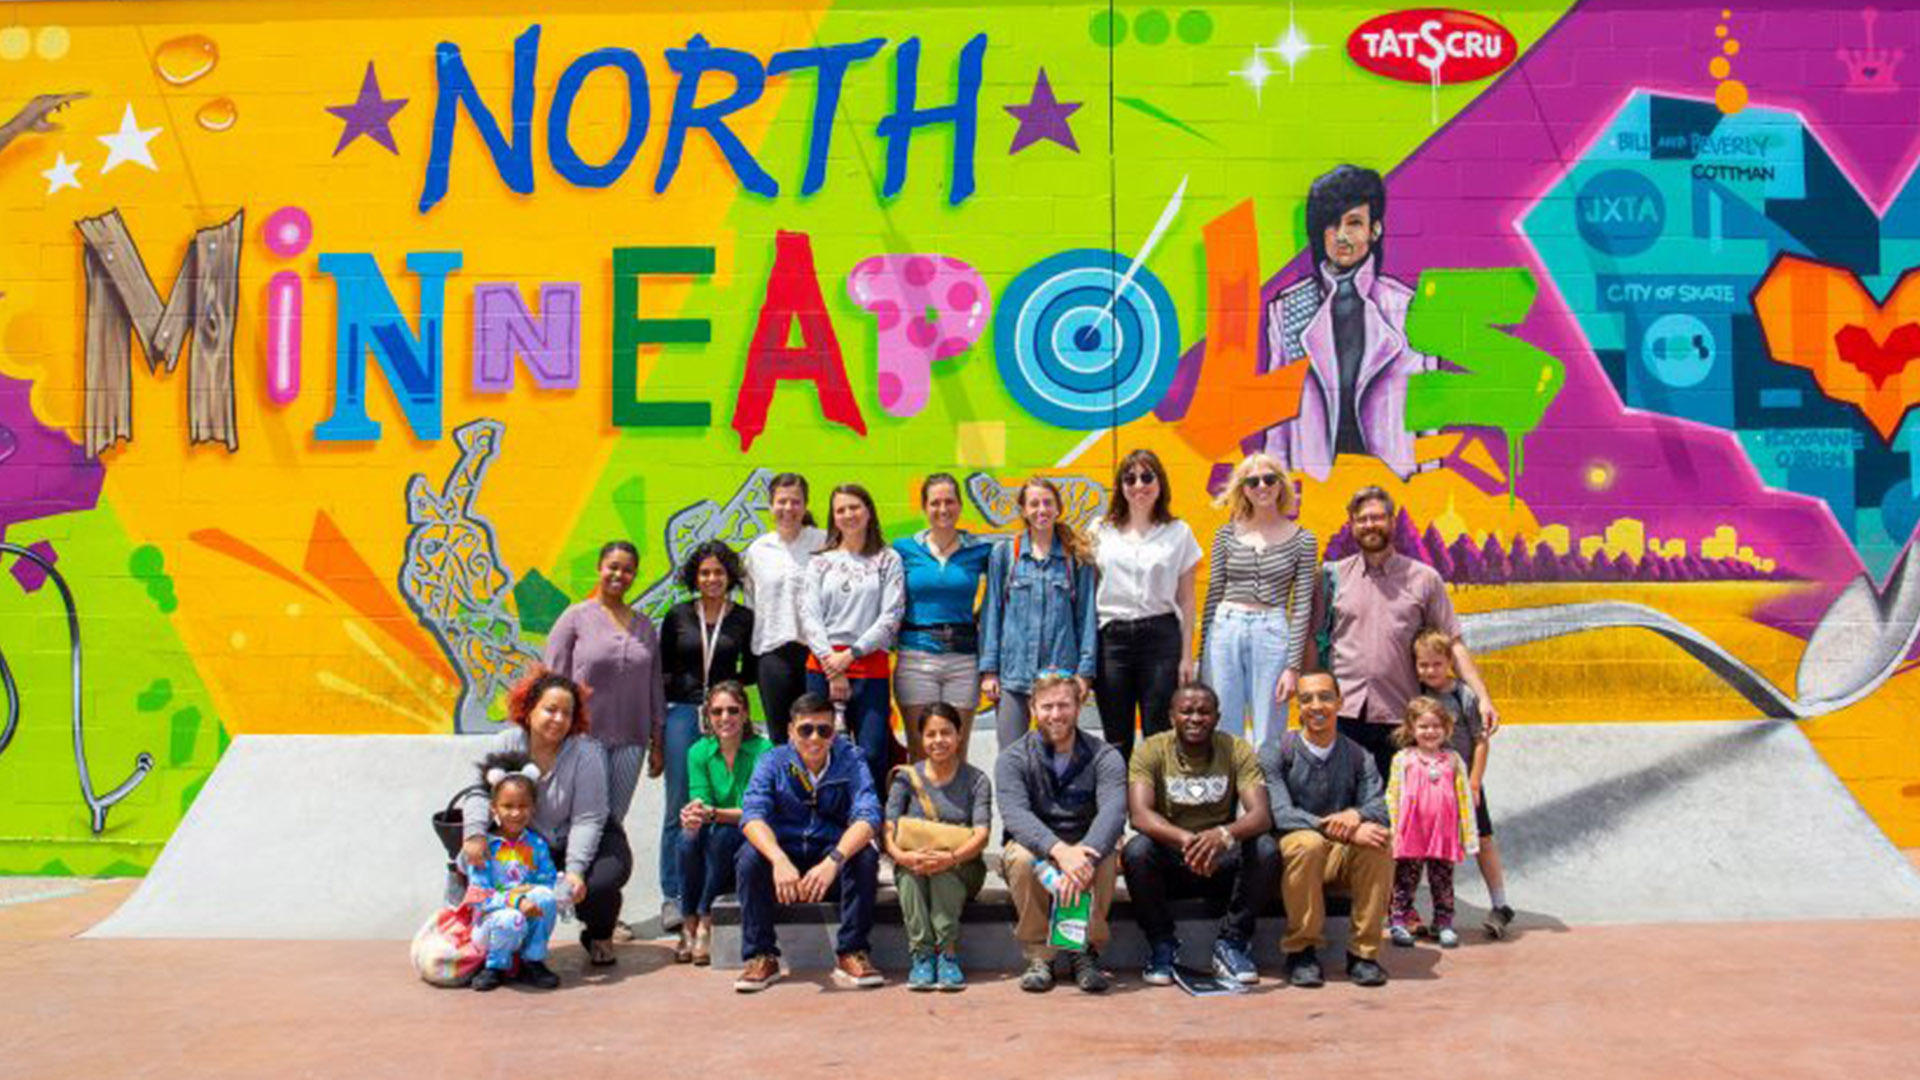 A cohort from the CREATE Initiative poses in front of a colorful mural that says "North Minneapolis"